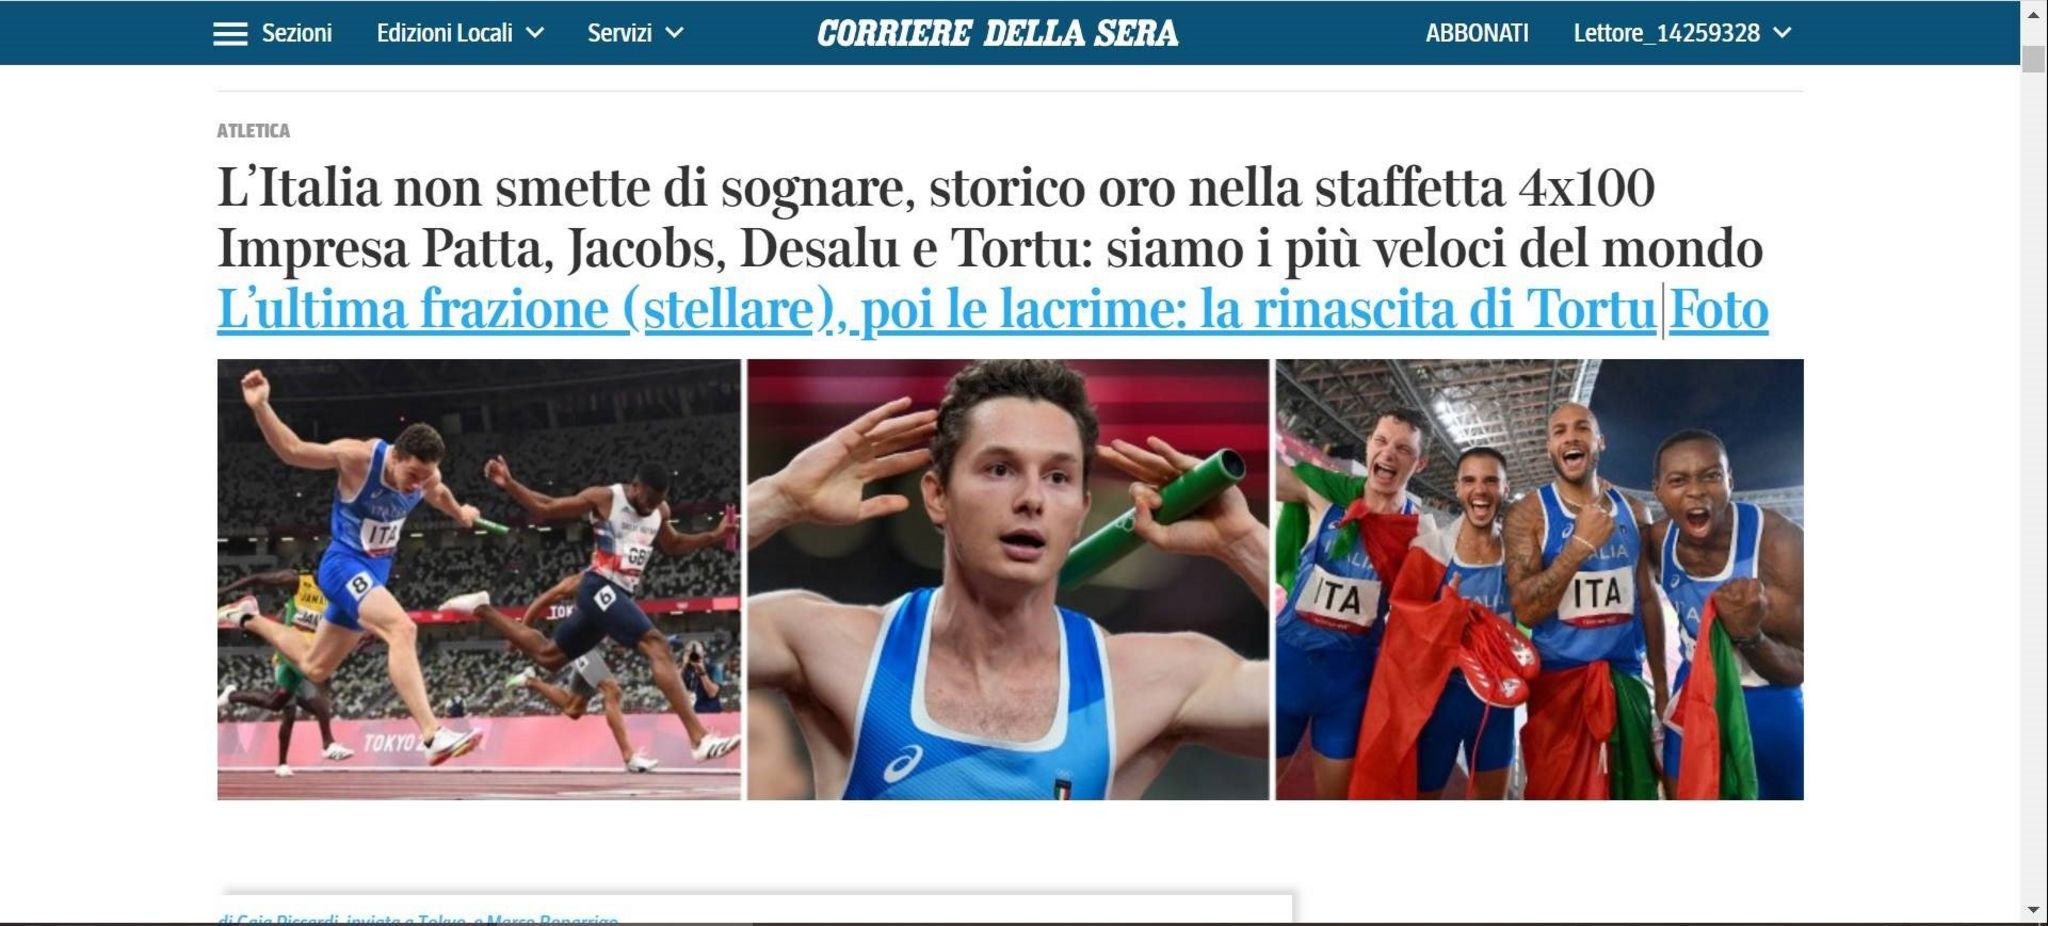 The front page of the Corriere Della Sera website